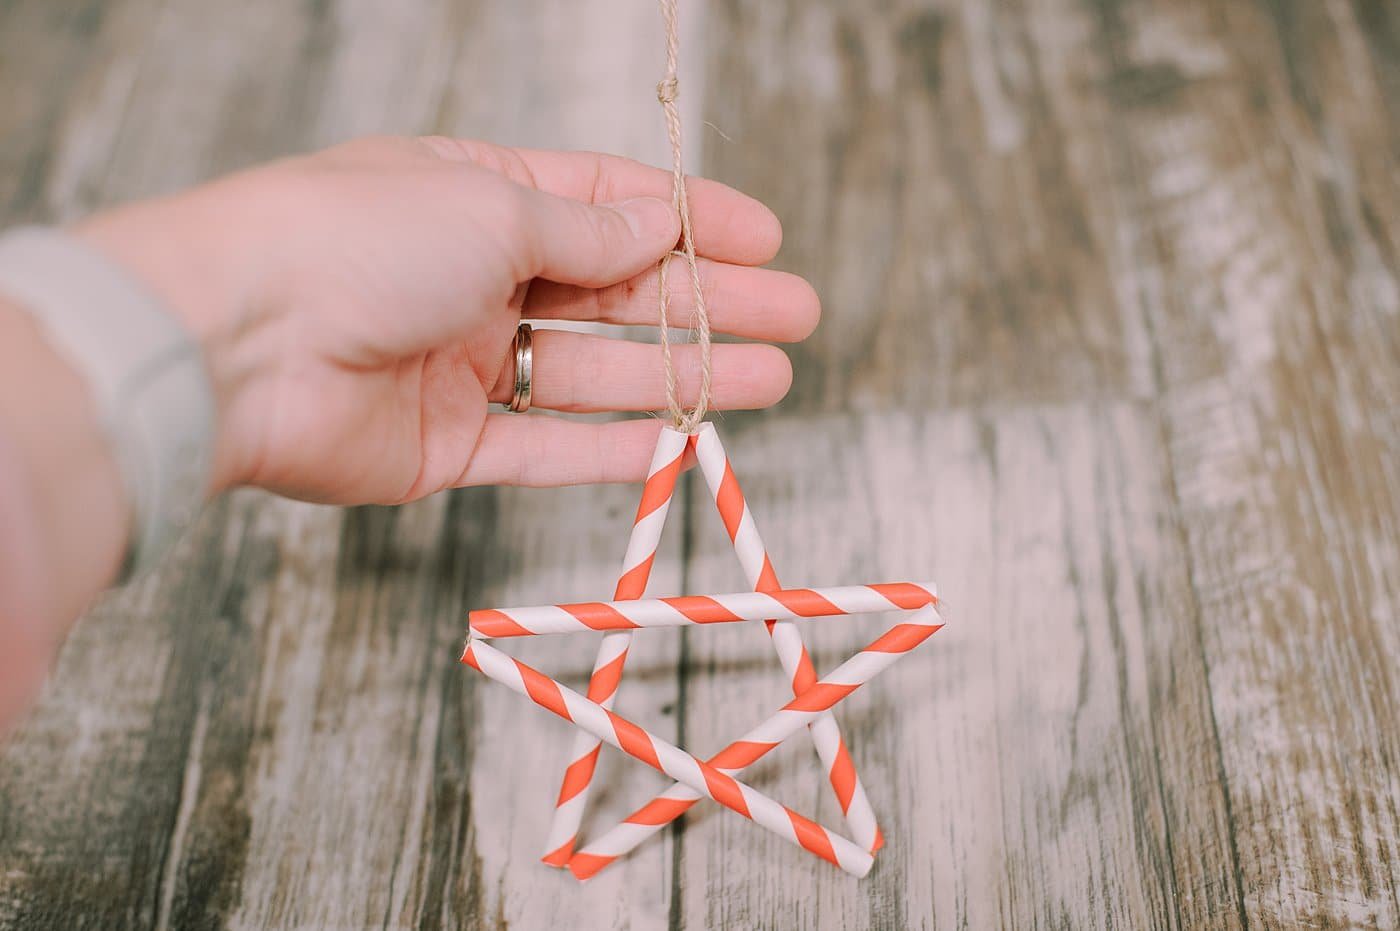 How to make a drinking straw christmas tree ornament.